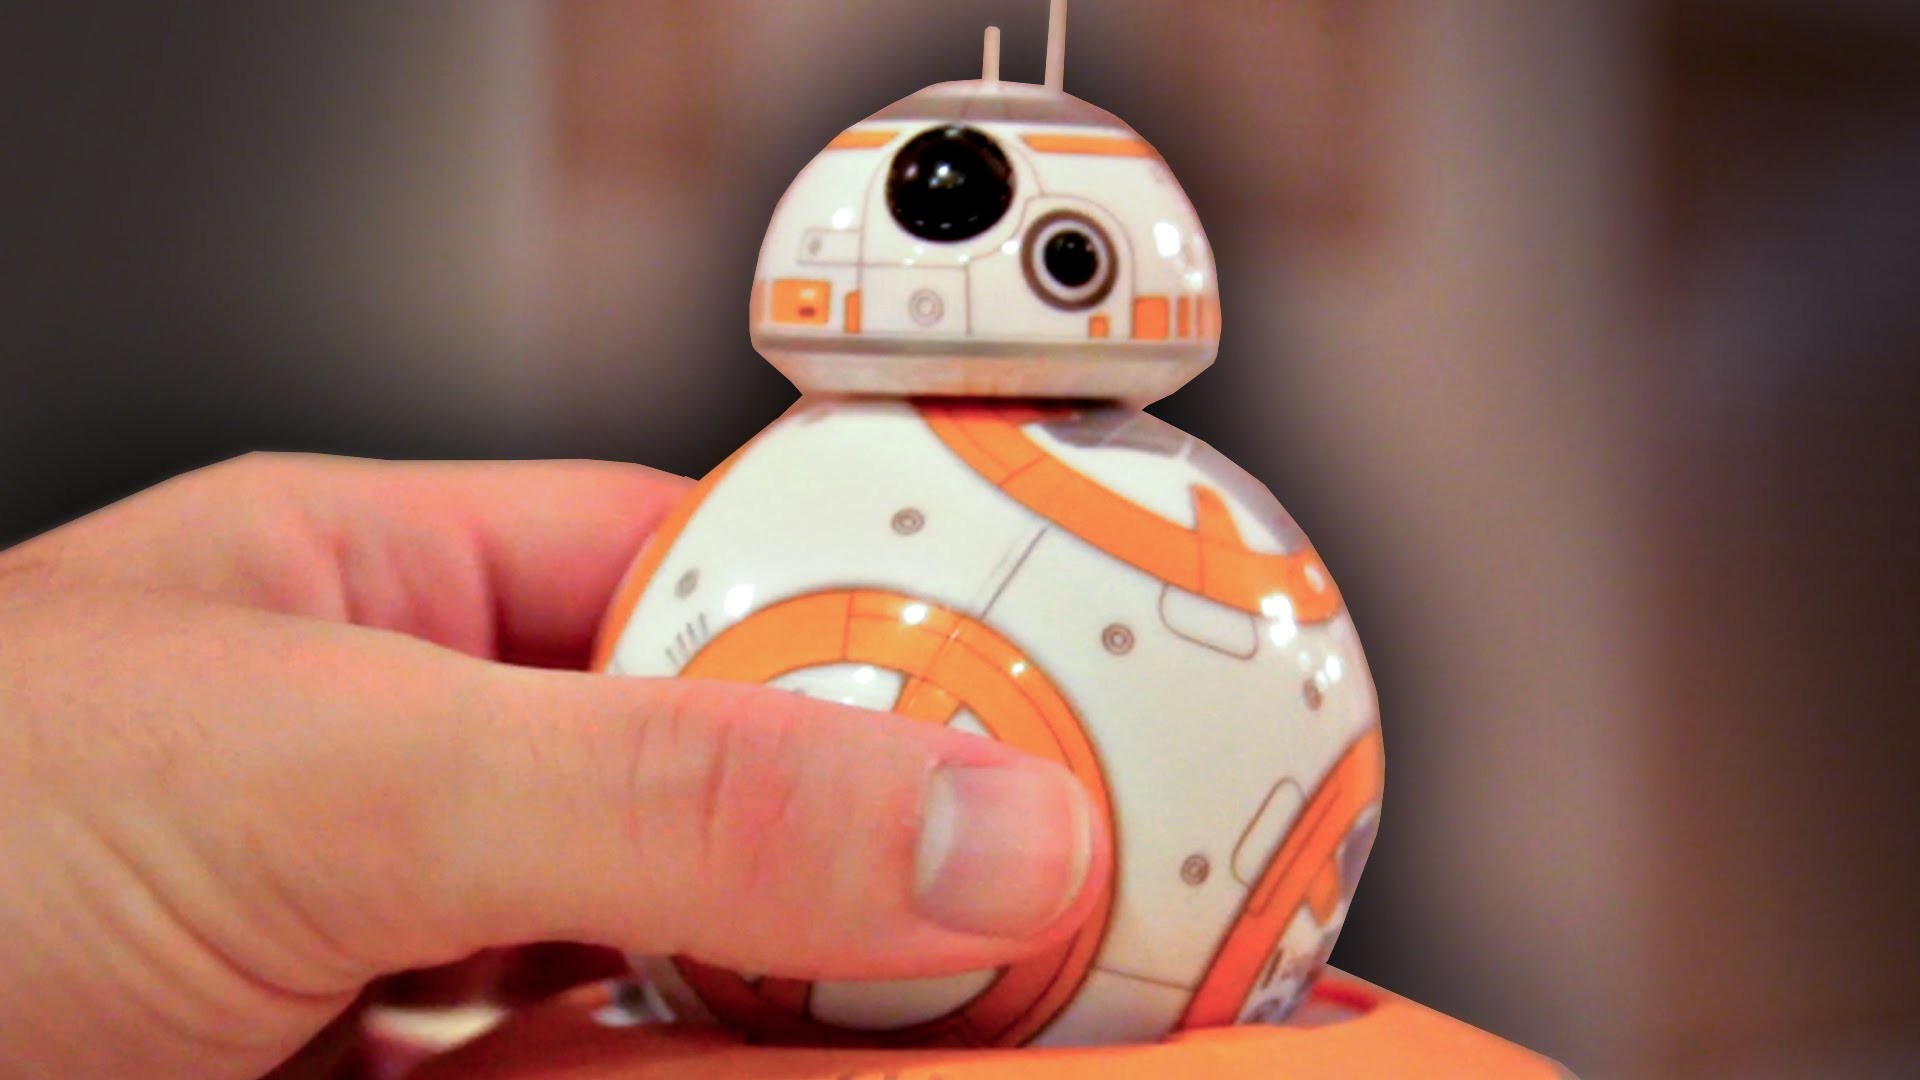 1920x1080 Hands-on with BB-8 Ball Droid Toy by Sphero! Star Wars Episode 7: The Force  Awakens Toy Collection - YouTube